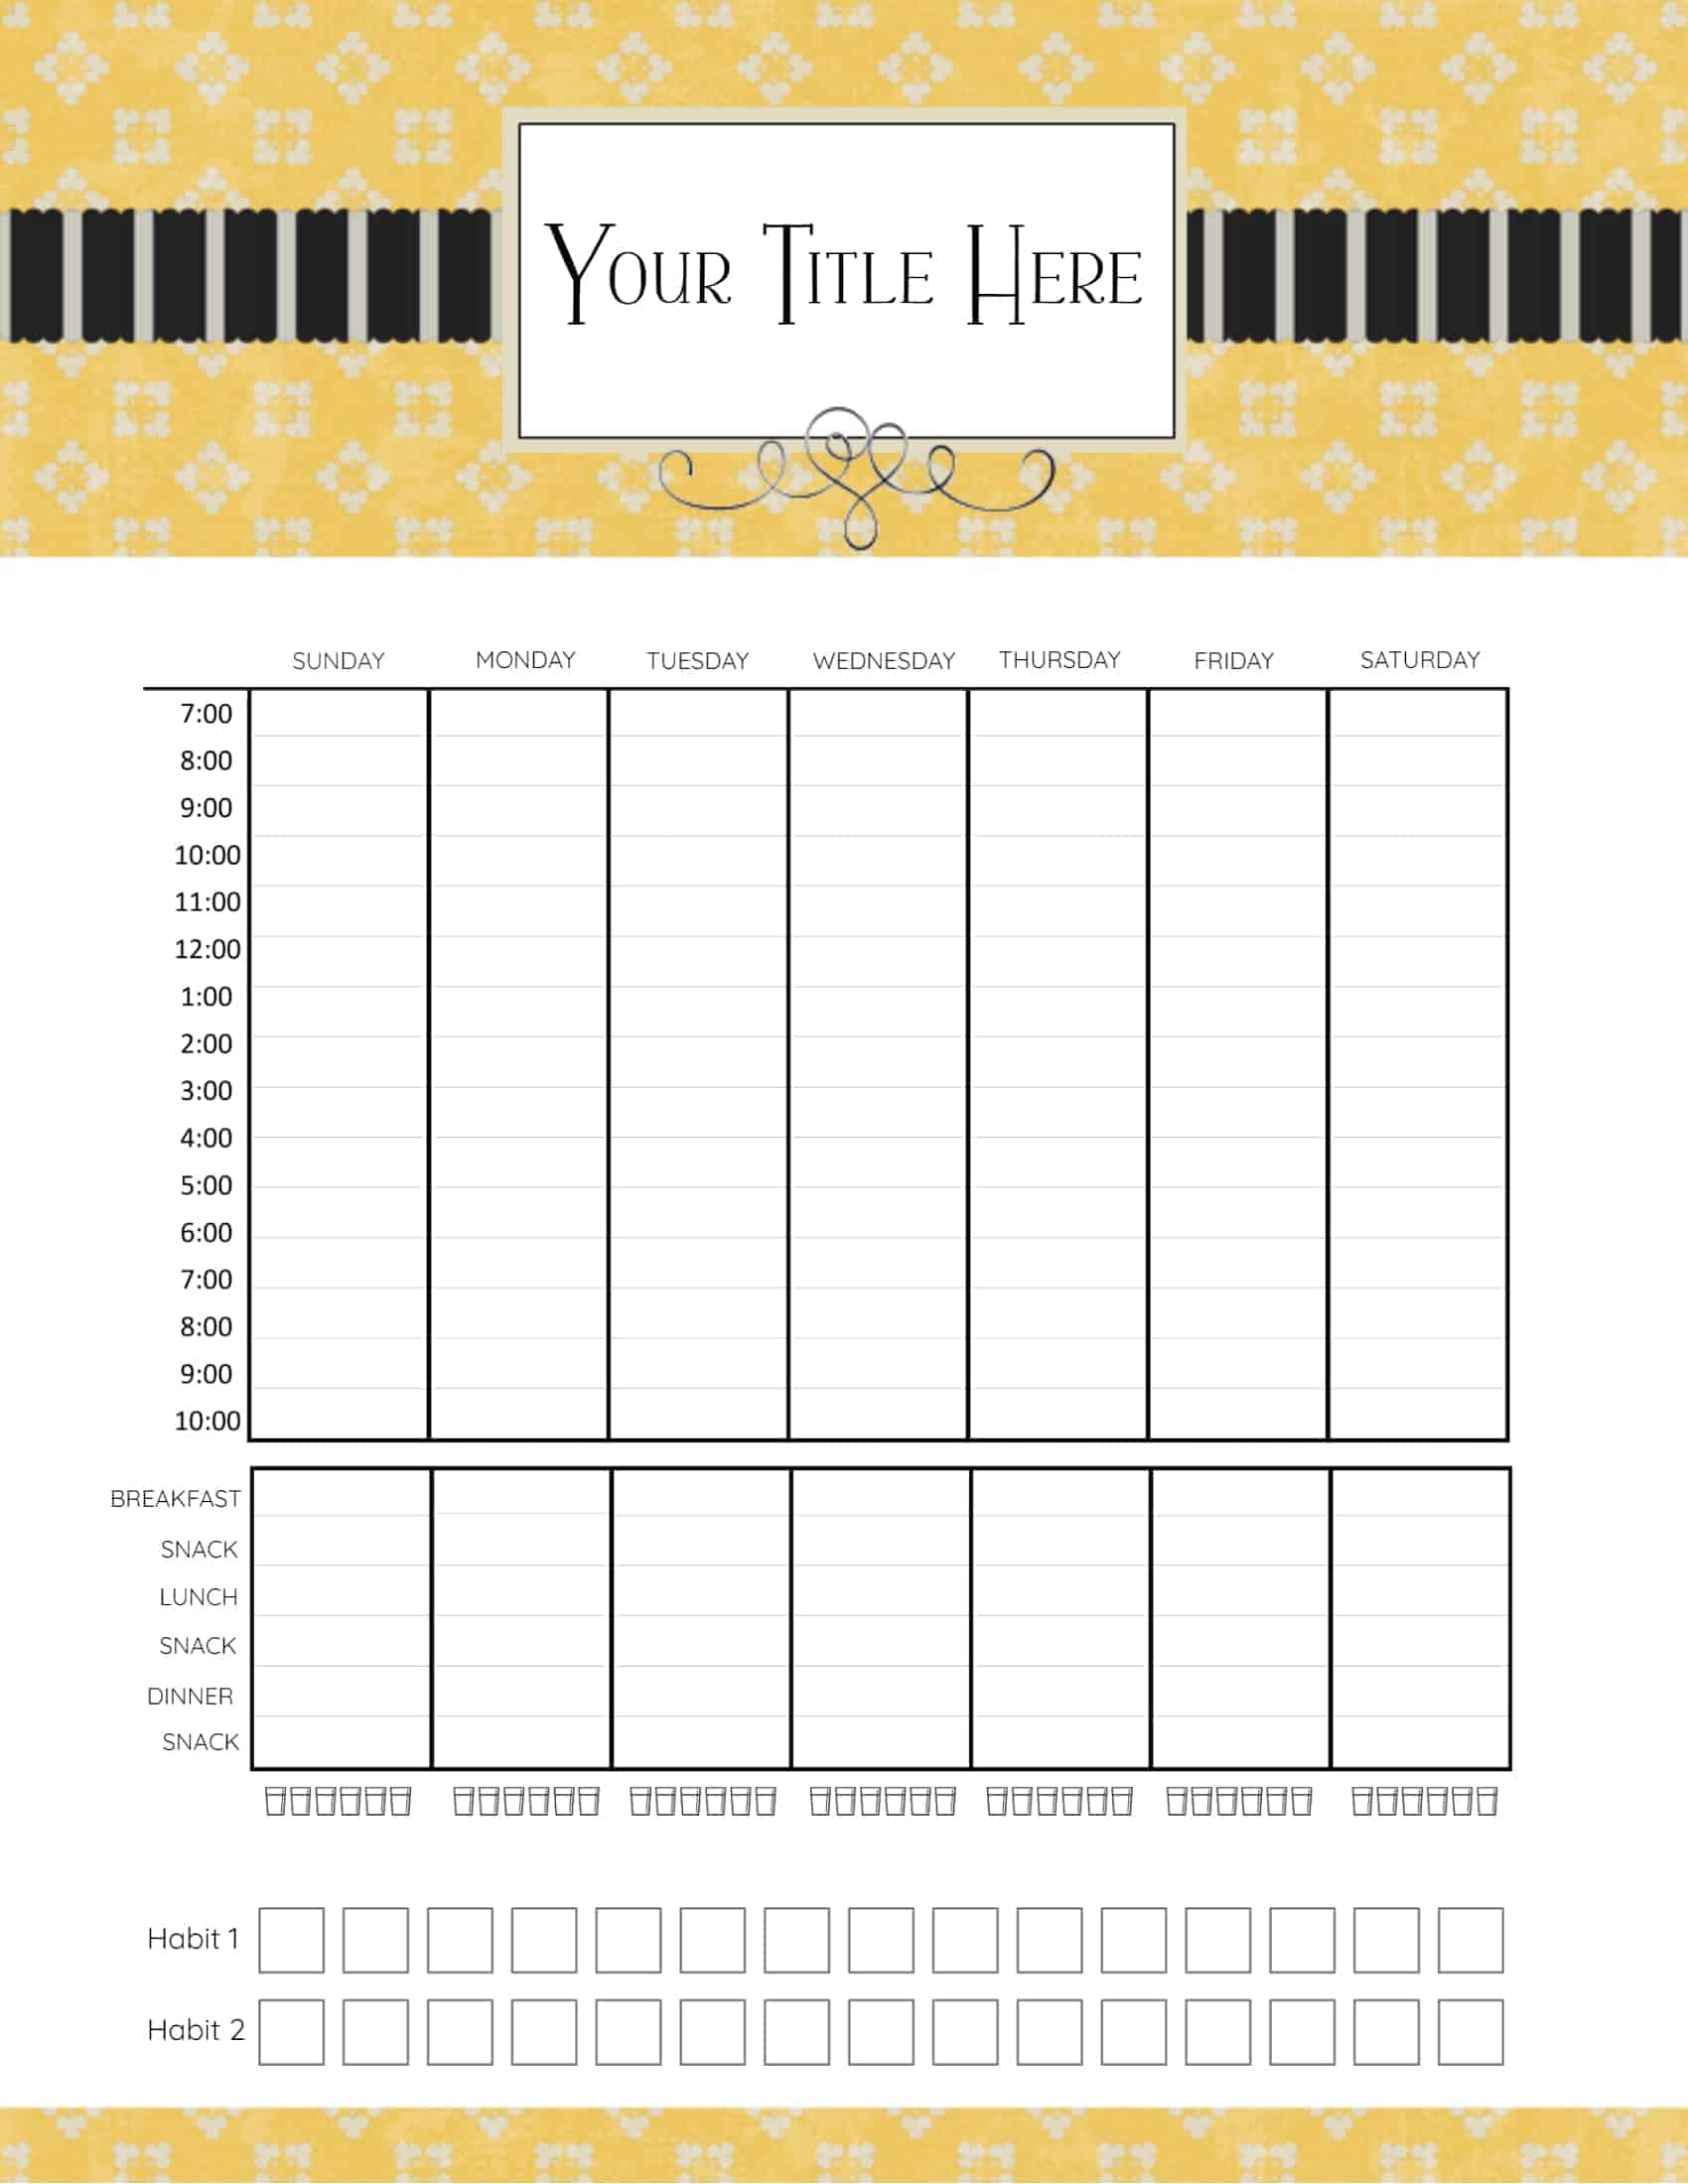 Weekly Schedule With Times Template from www.101planners.com